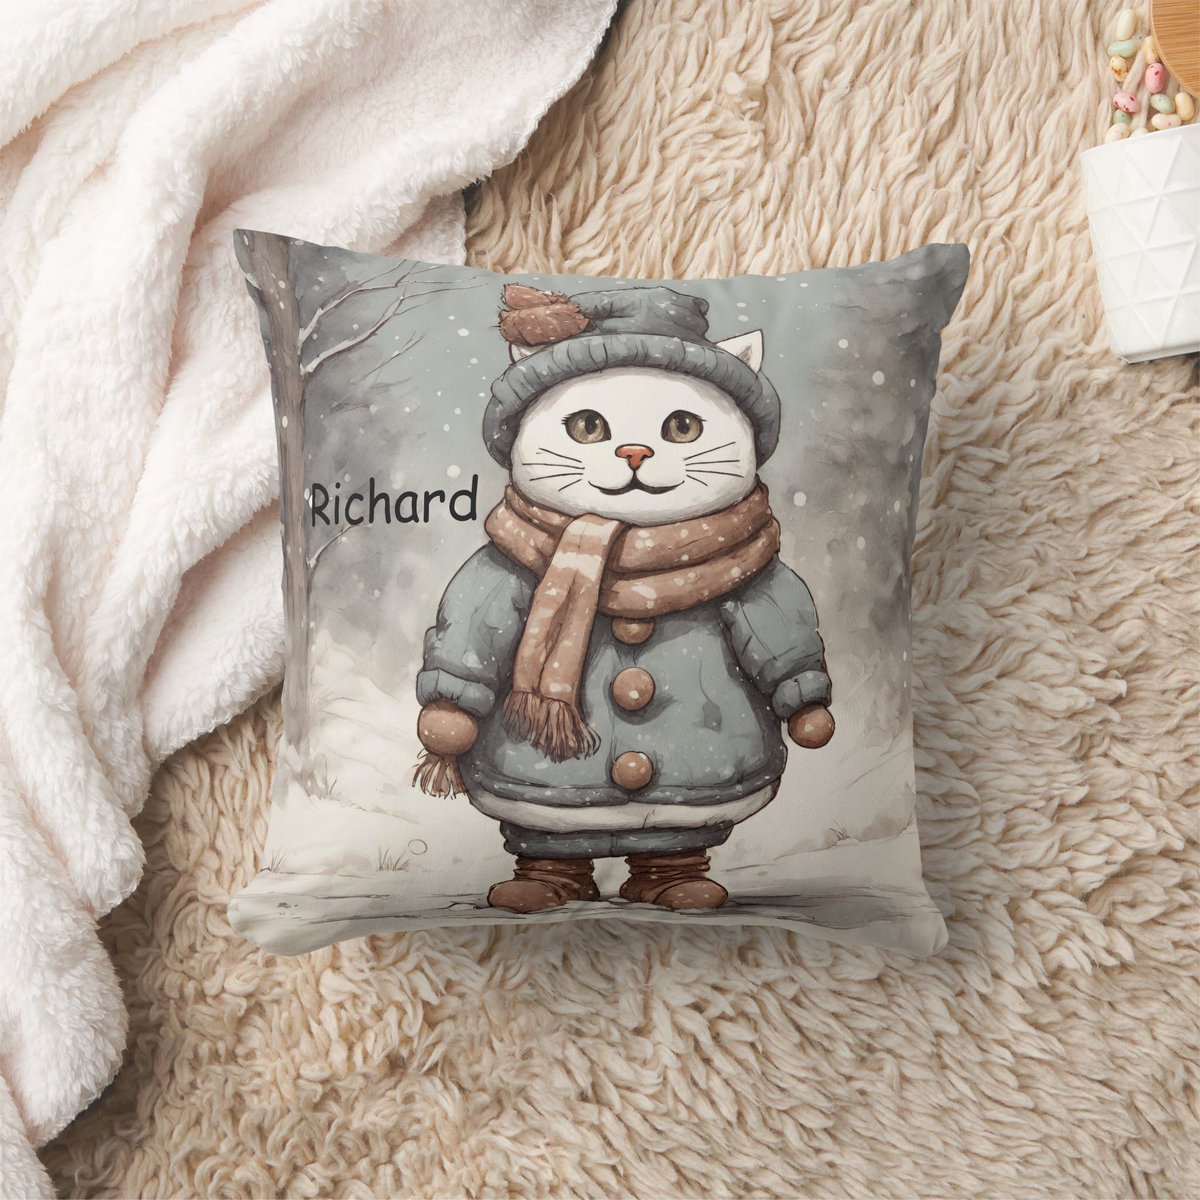 Cute Christmas Cat Snowman Watercolor Whimsical  Cushion zazzle.co.uk/z/a1opevzr?rf=… via @zazzle Great personalised Christmas gift for your kid’s bedroom. Check it out! #christmascatgifts #giftsforcatlovers #catgifts #kids #babynursery #babyshowergifts #baby #CatLovers